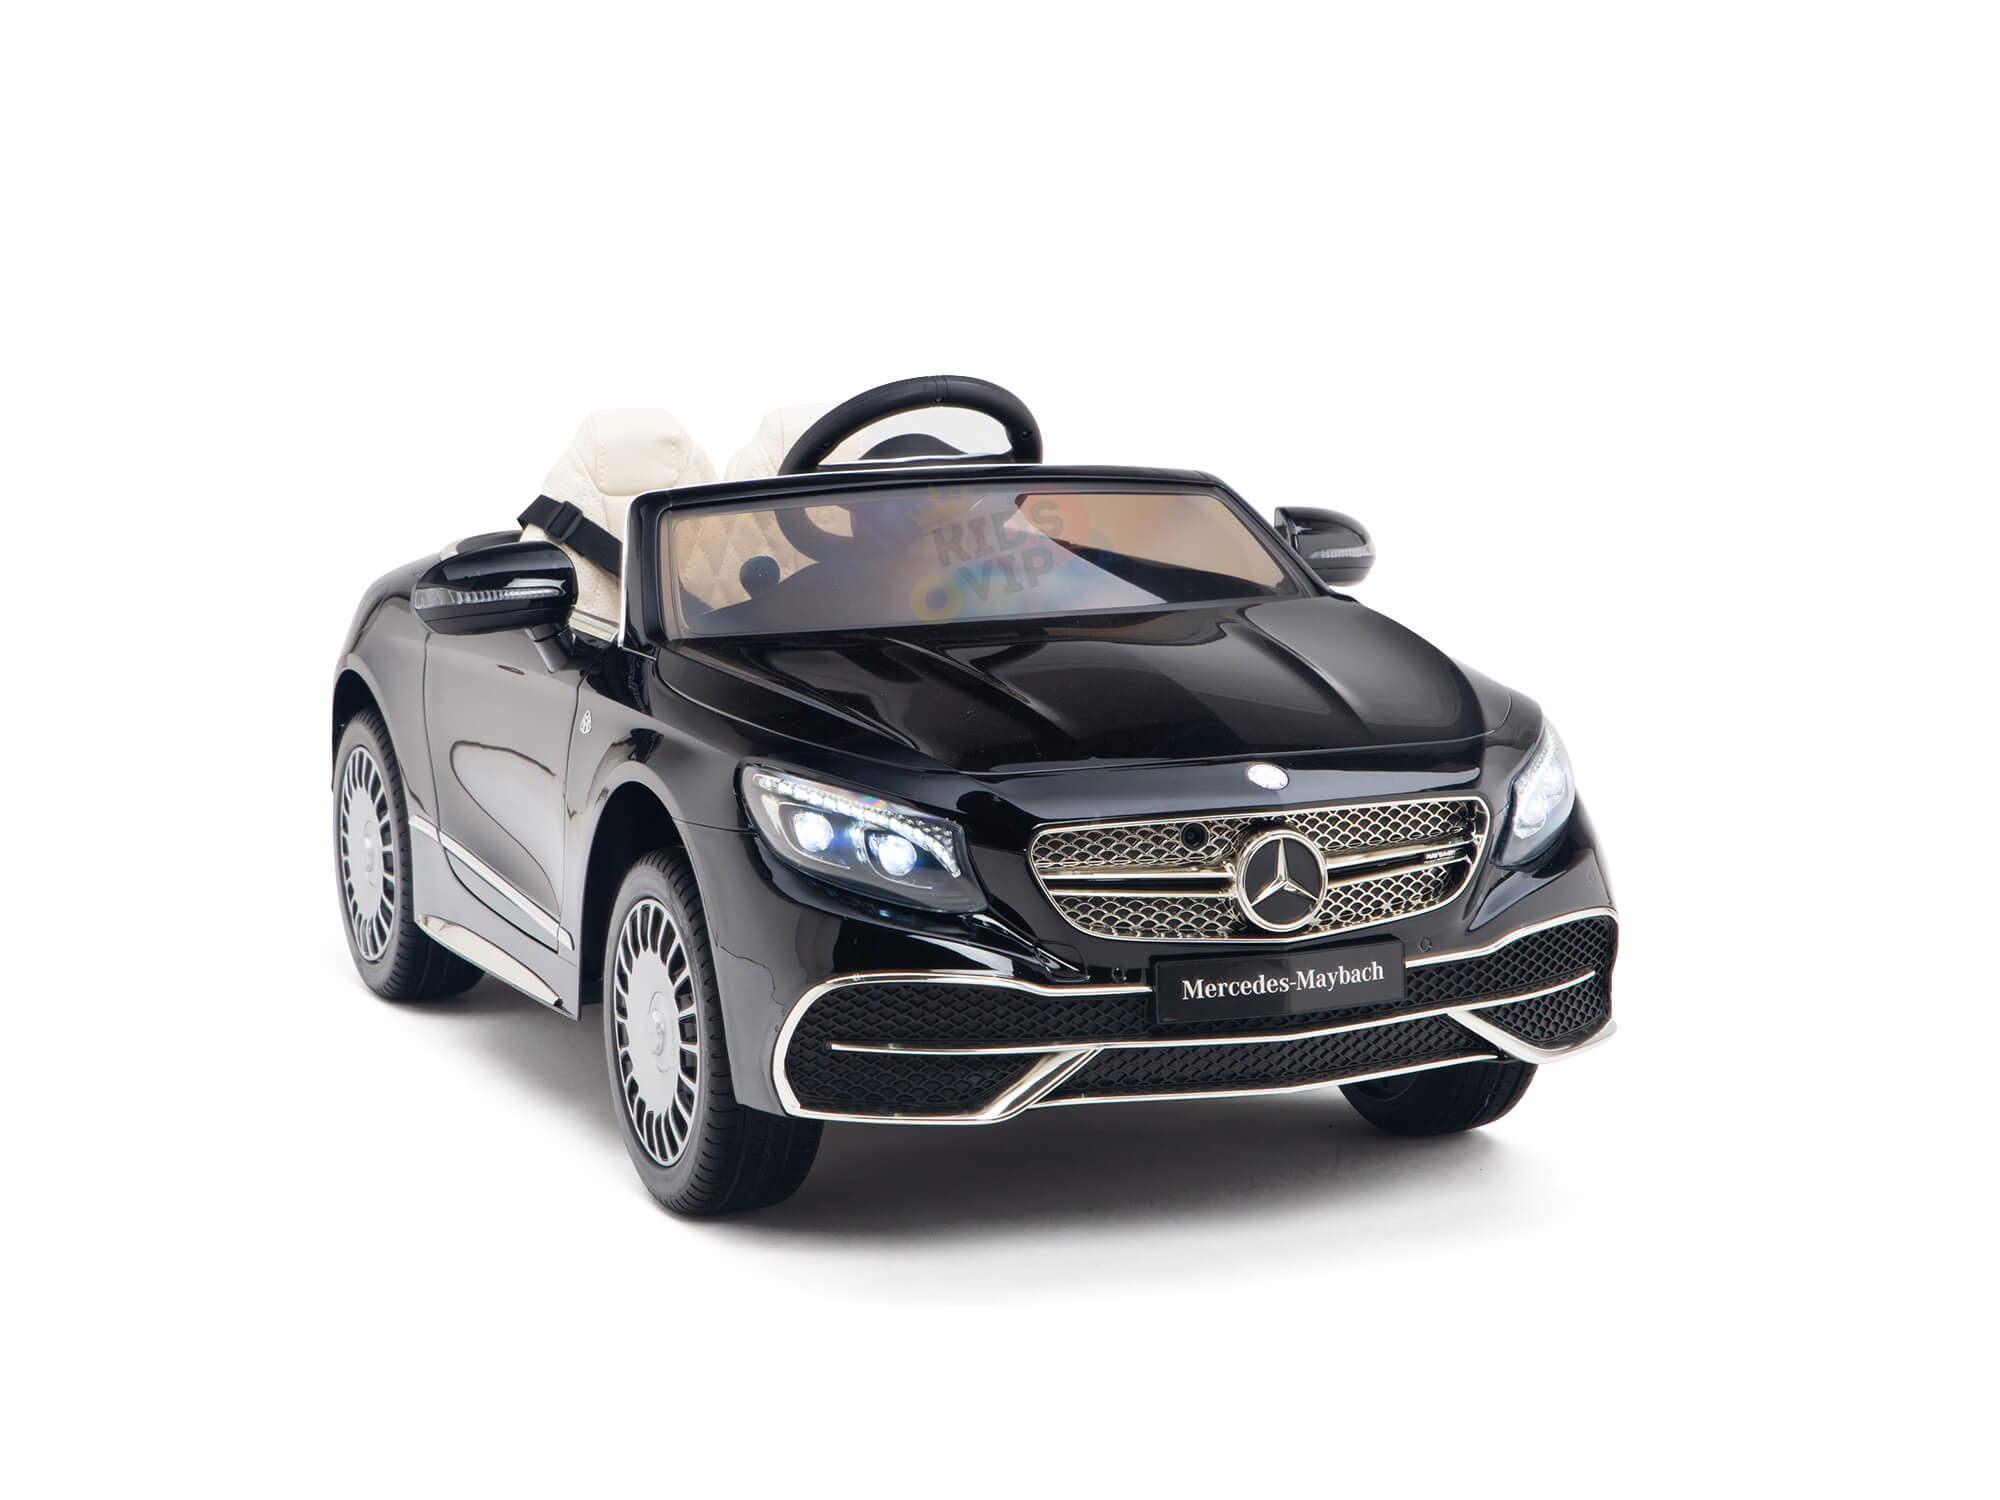 Kidsvip 12V Mercedes Maybach Kids Ride On Car Black 1 2 Are Ride-On Cars Worth It? Let’s Find Out